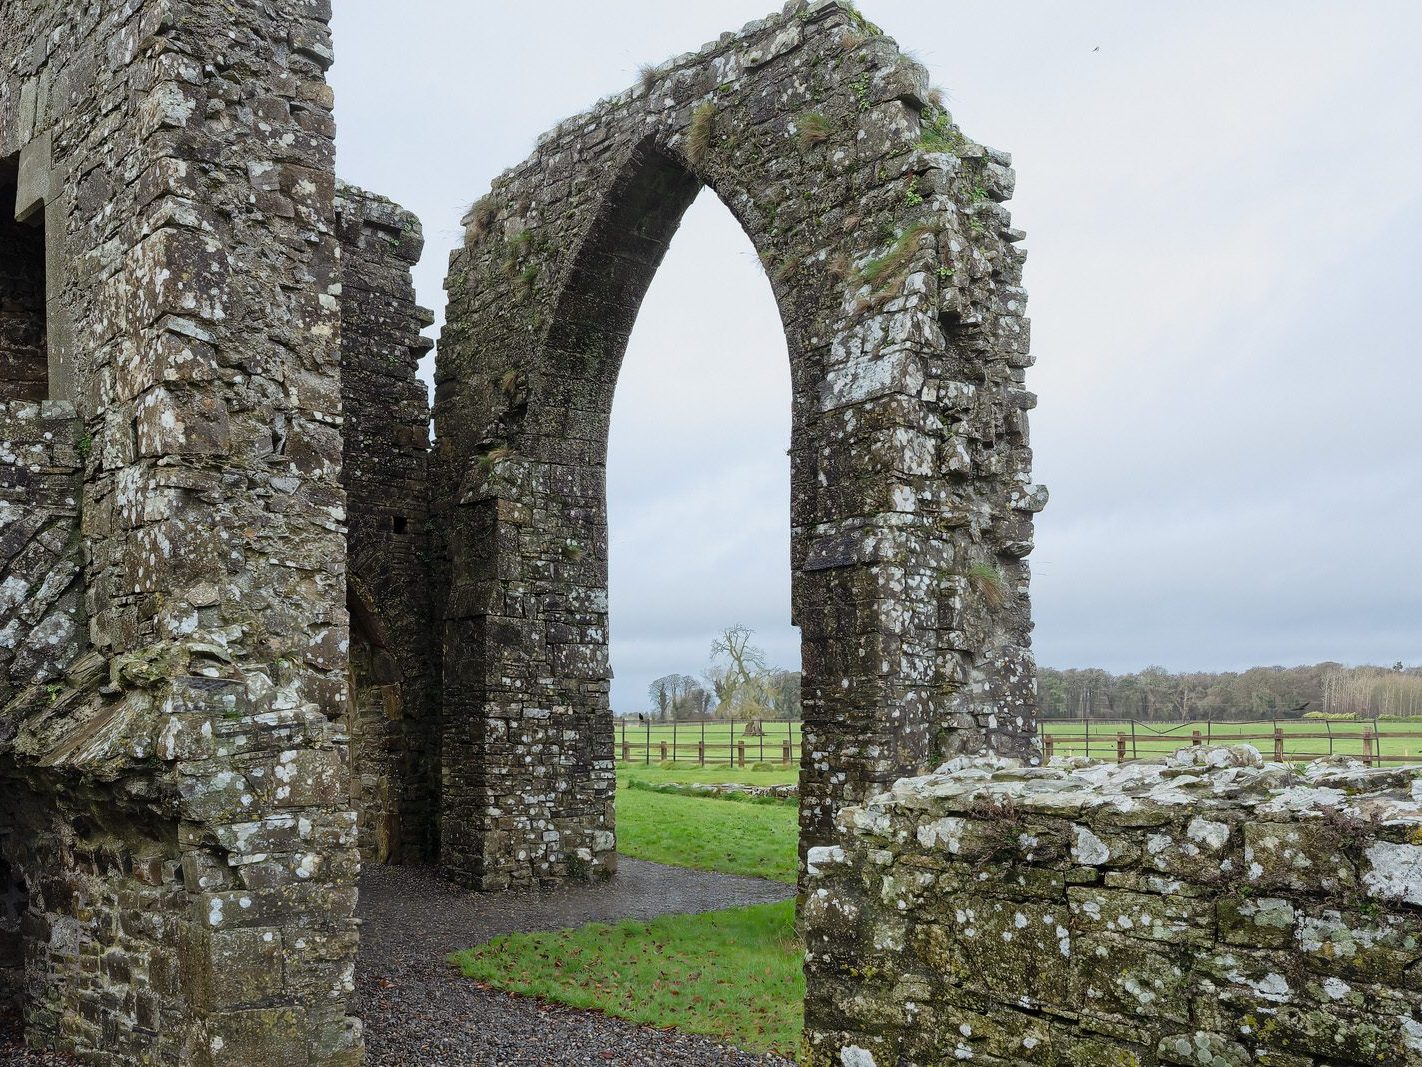 BECTIVE ABBEY WHICH I VISITED LAST CHRISTMAS [THERE WERE NO OTHER VISITORS AS IT WAS A VERY WET DAY]--225219-1